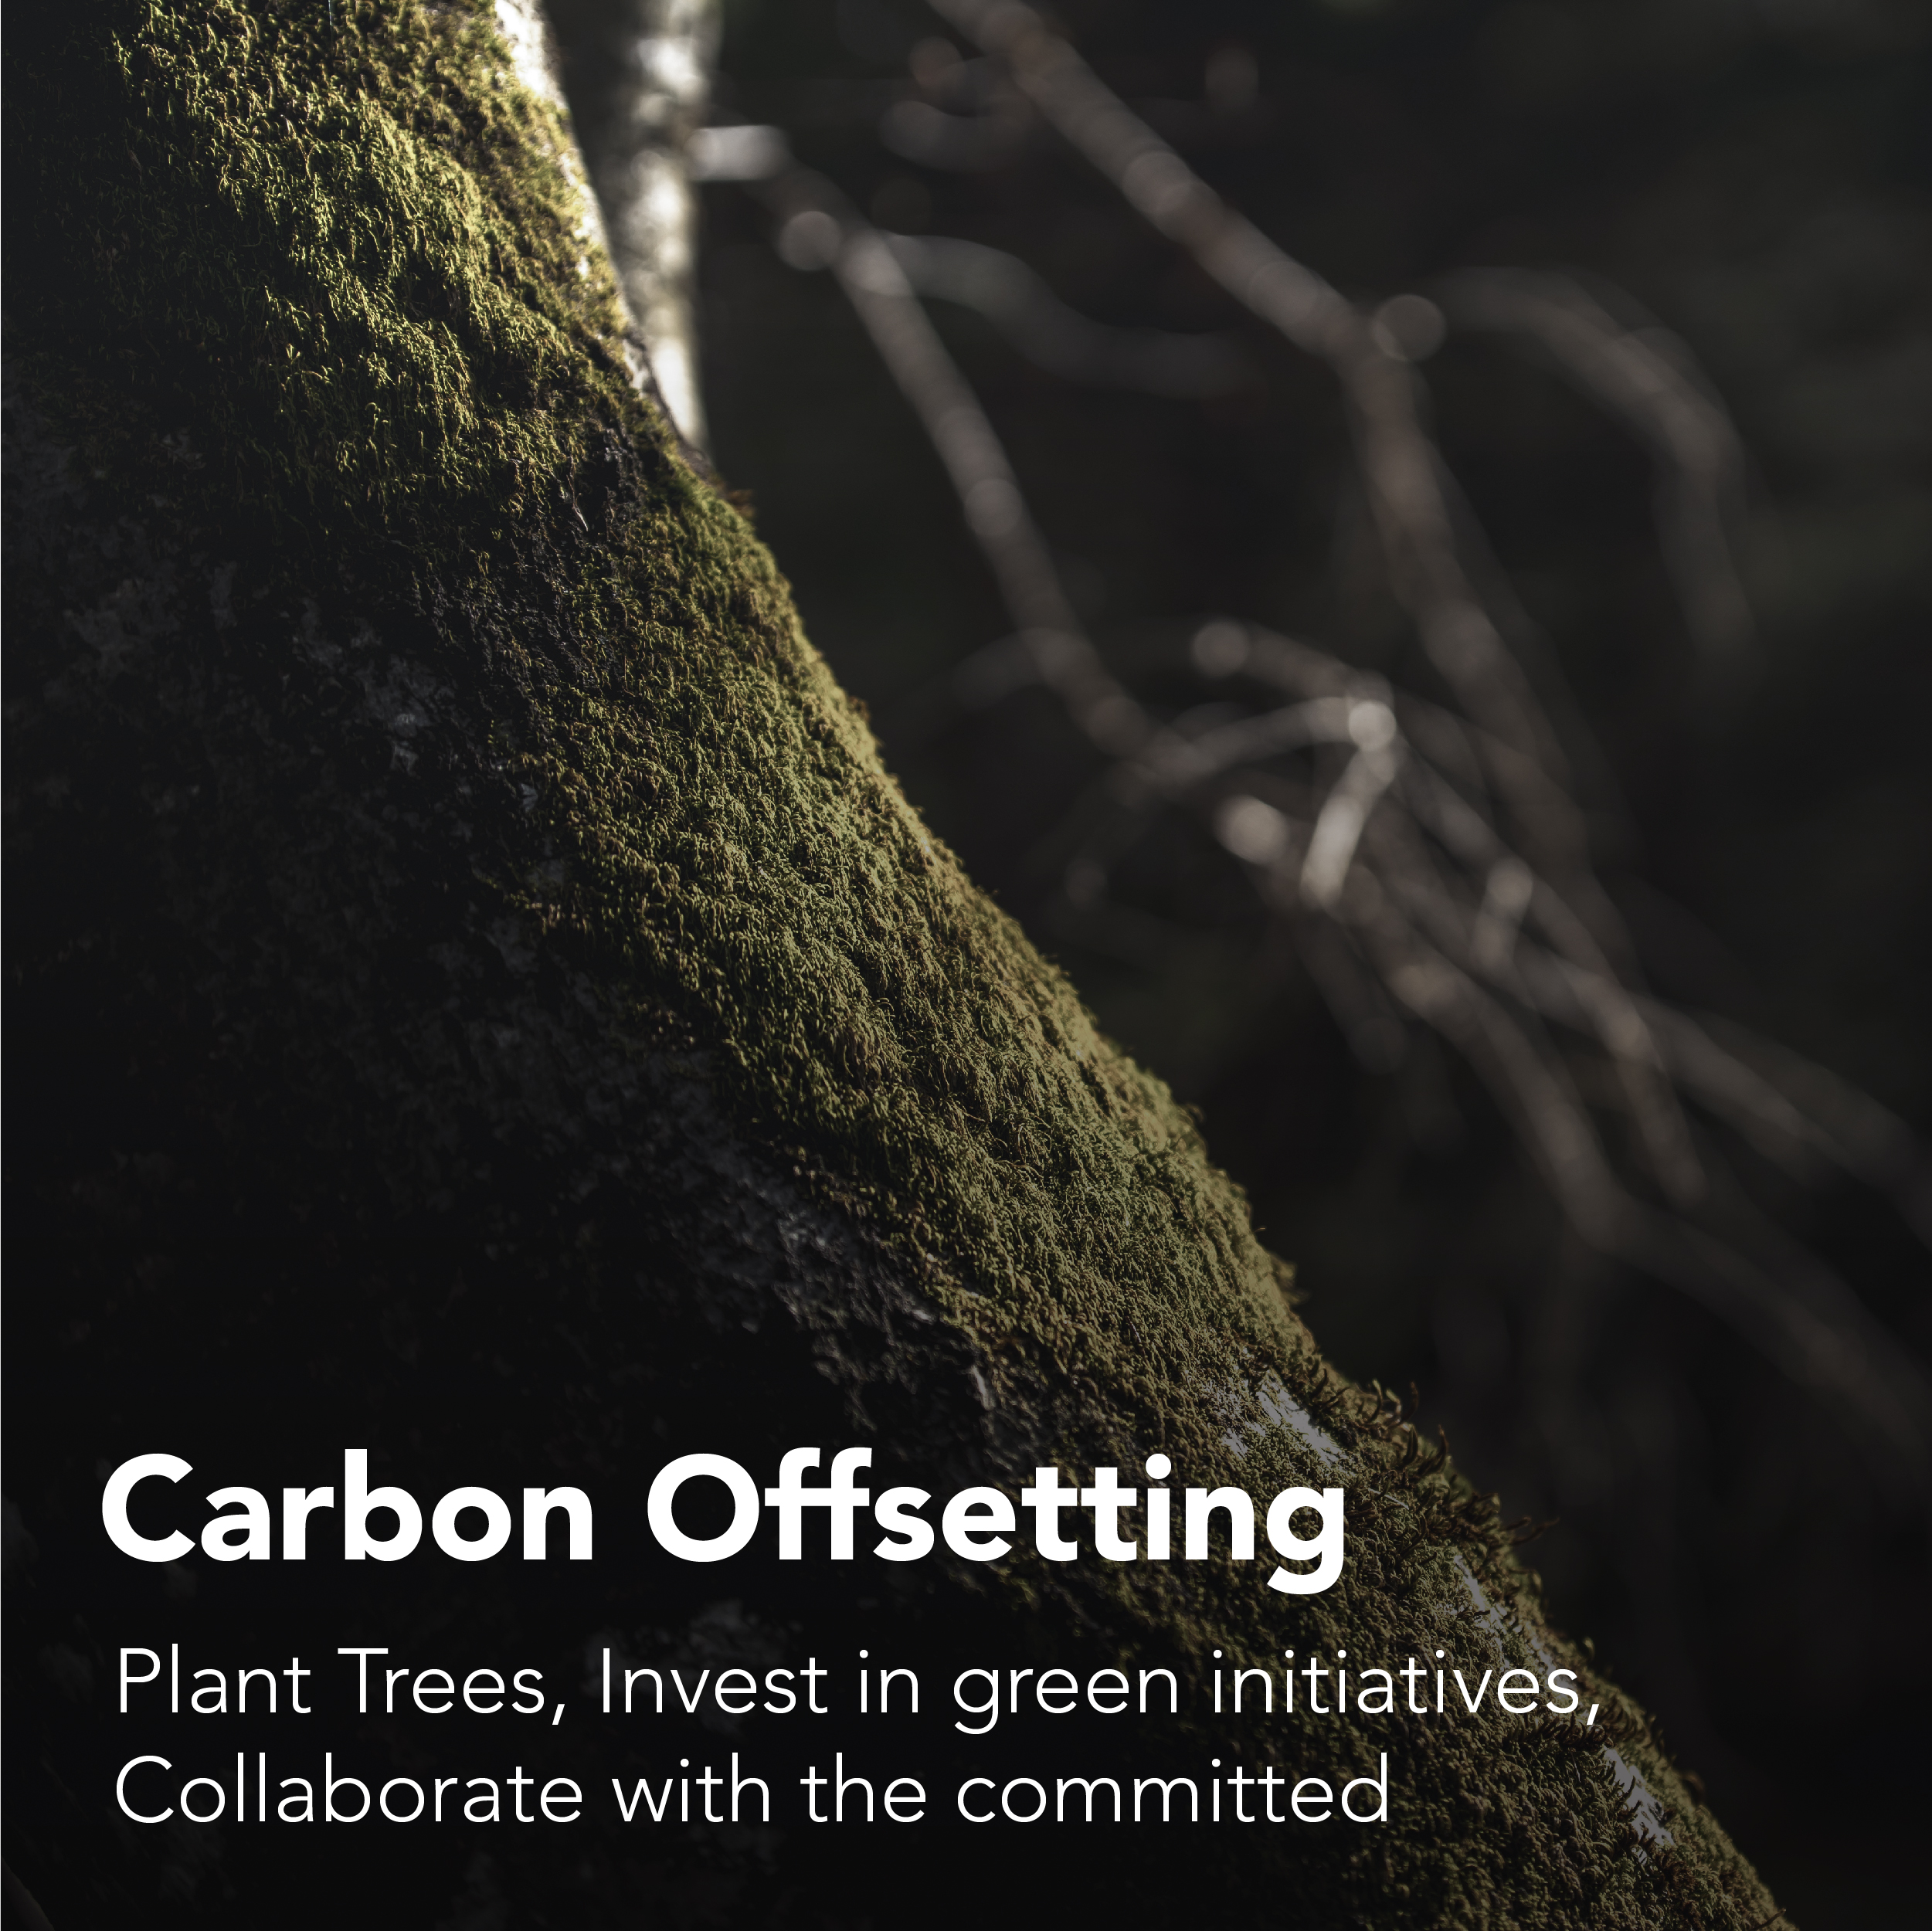 Carbon Offsetting Plant Trees, Invest in green initiatives, Collaborate with the committed